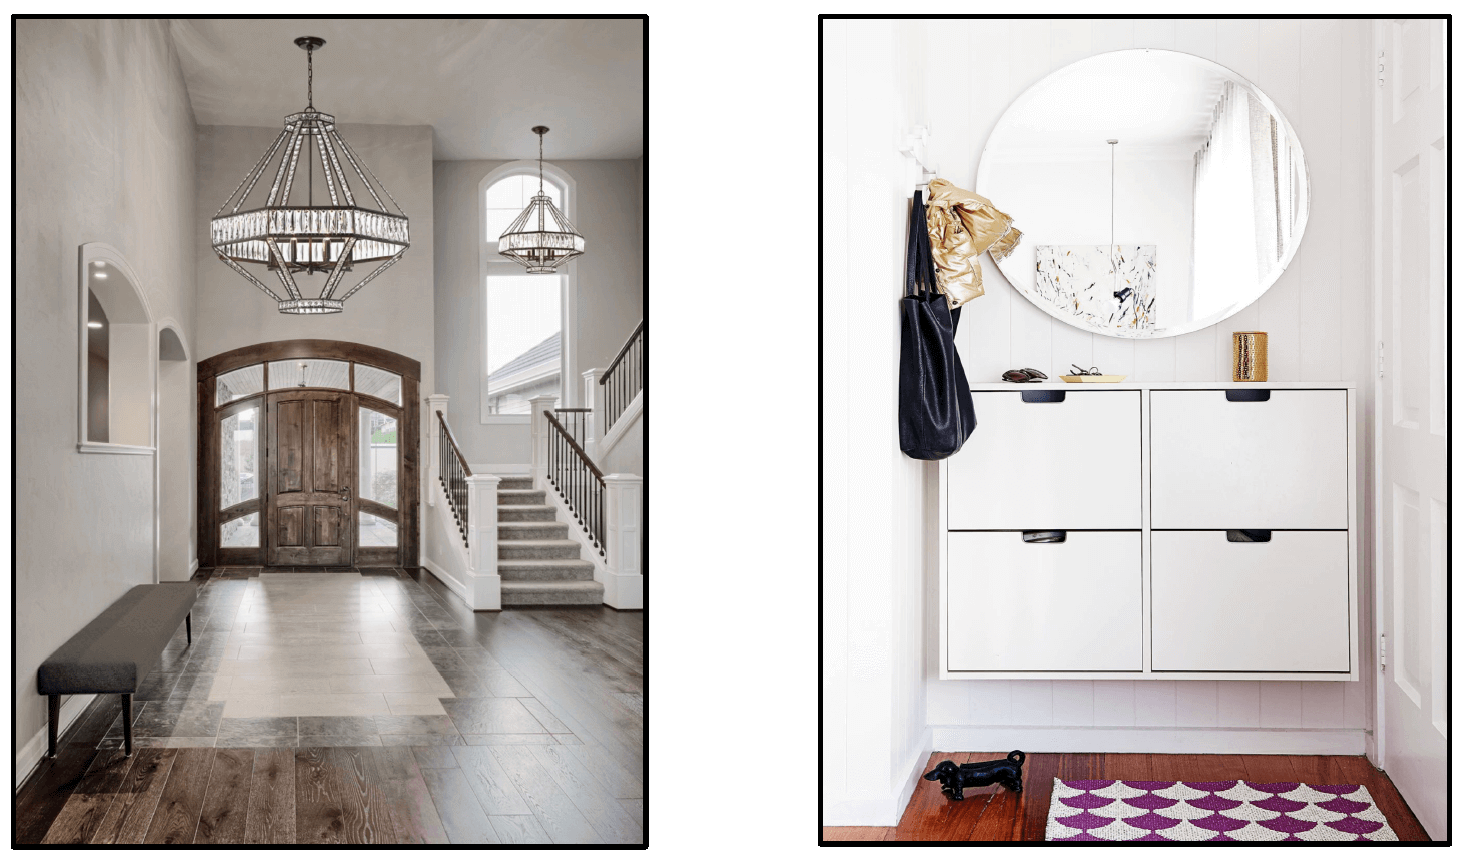 Entryway examples of large and small spaces